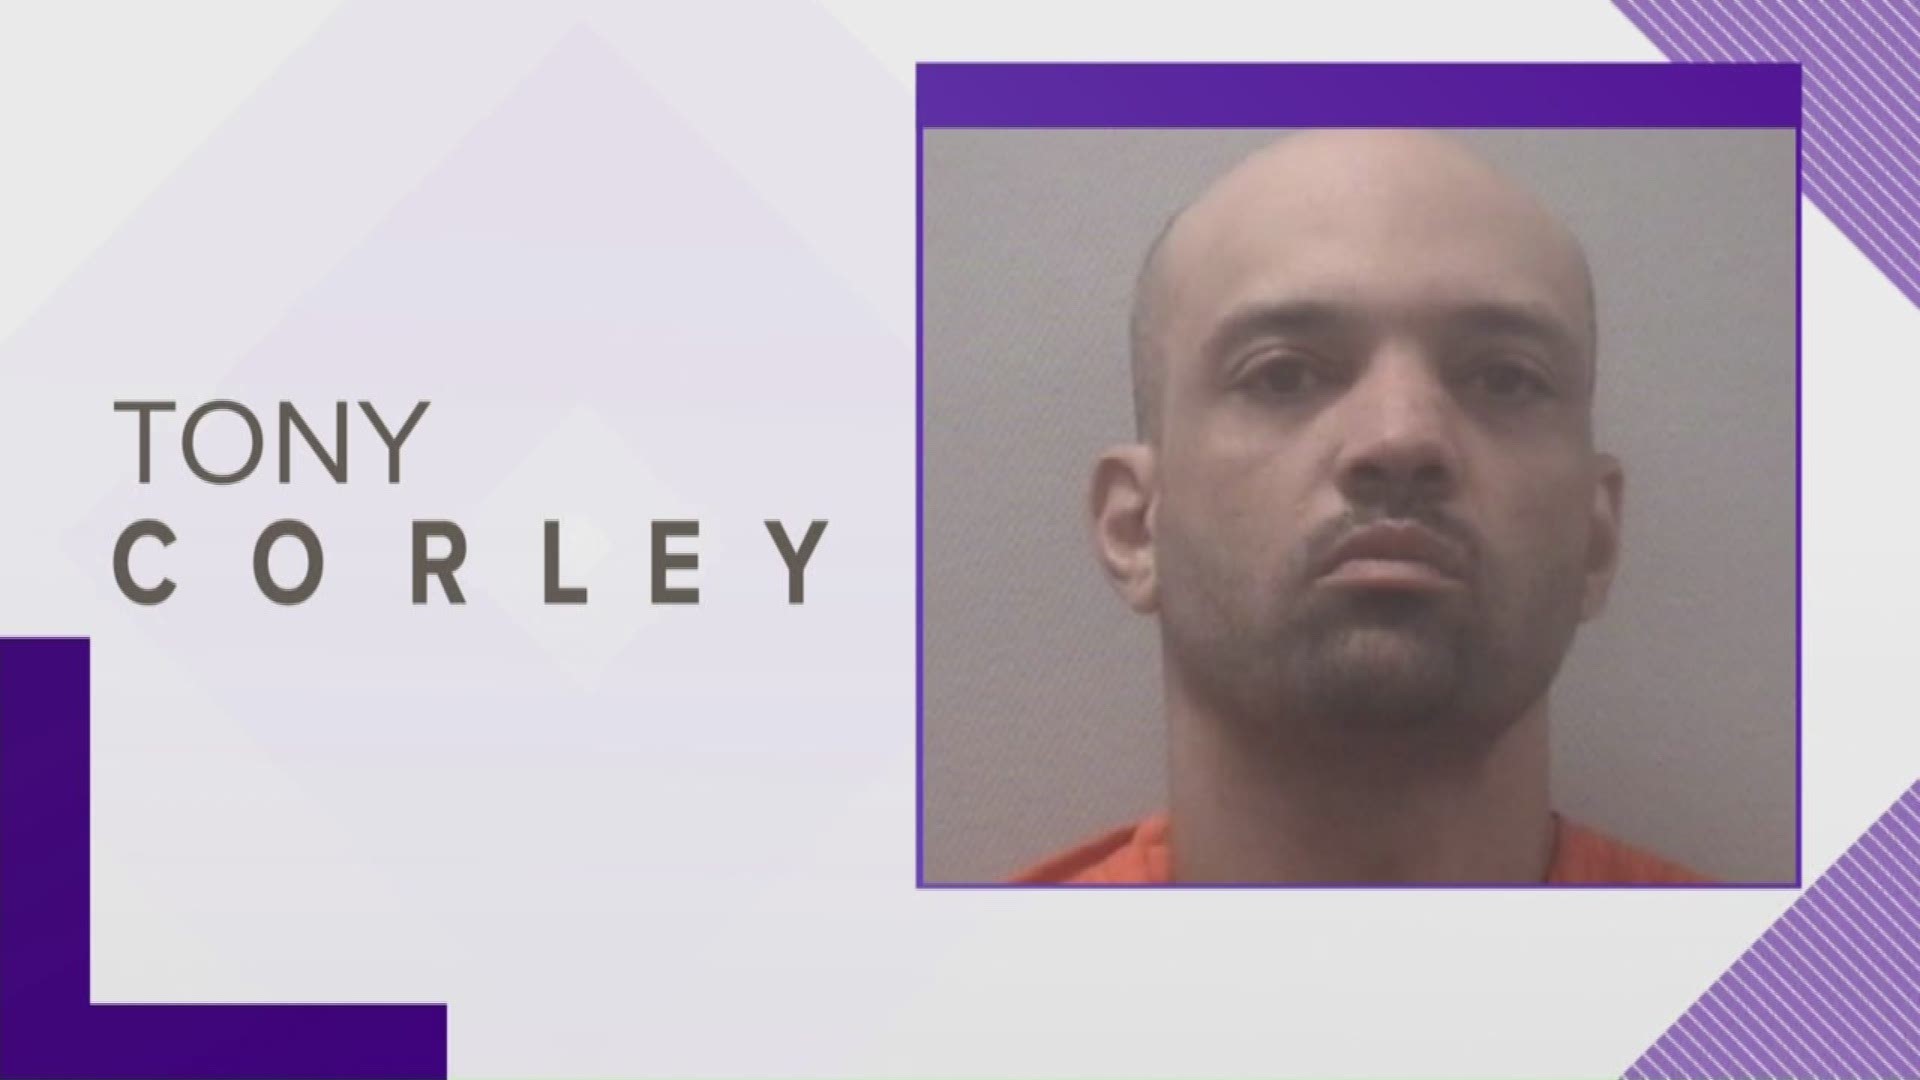 Lee Anthony Corley was sentenced to life in prison without parole on Monday for the death of Alena Marie Kennedy.